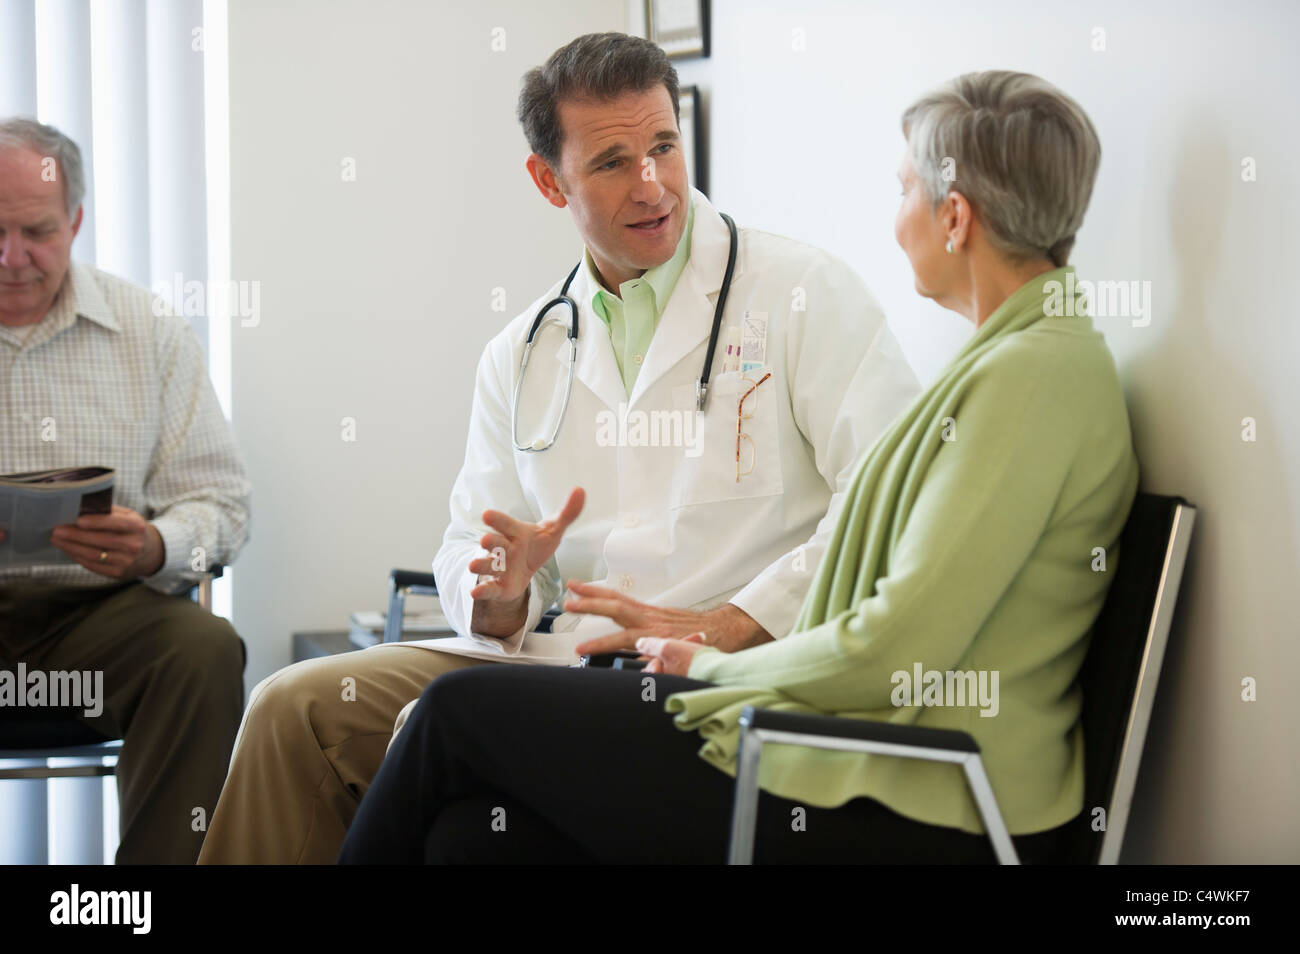 USA, New Jersey, Jersey City, Senior couple talking to doctor Stock Photo